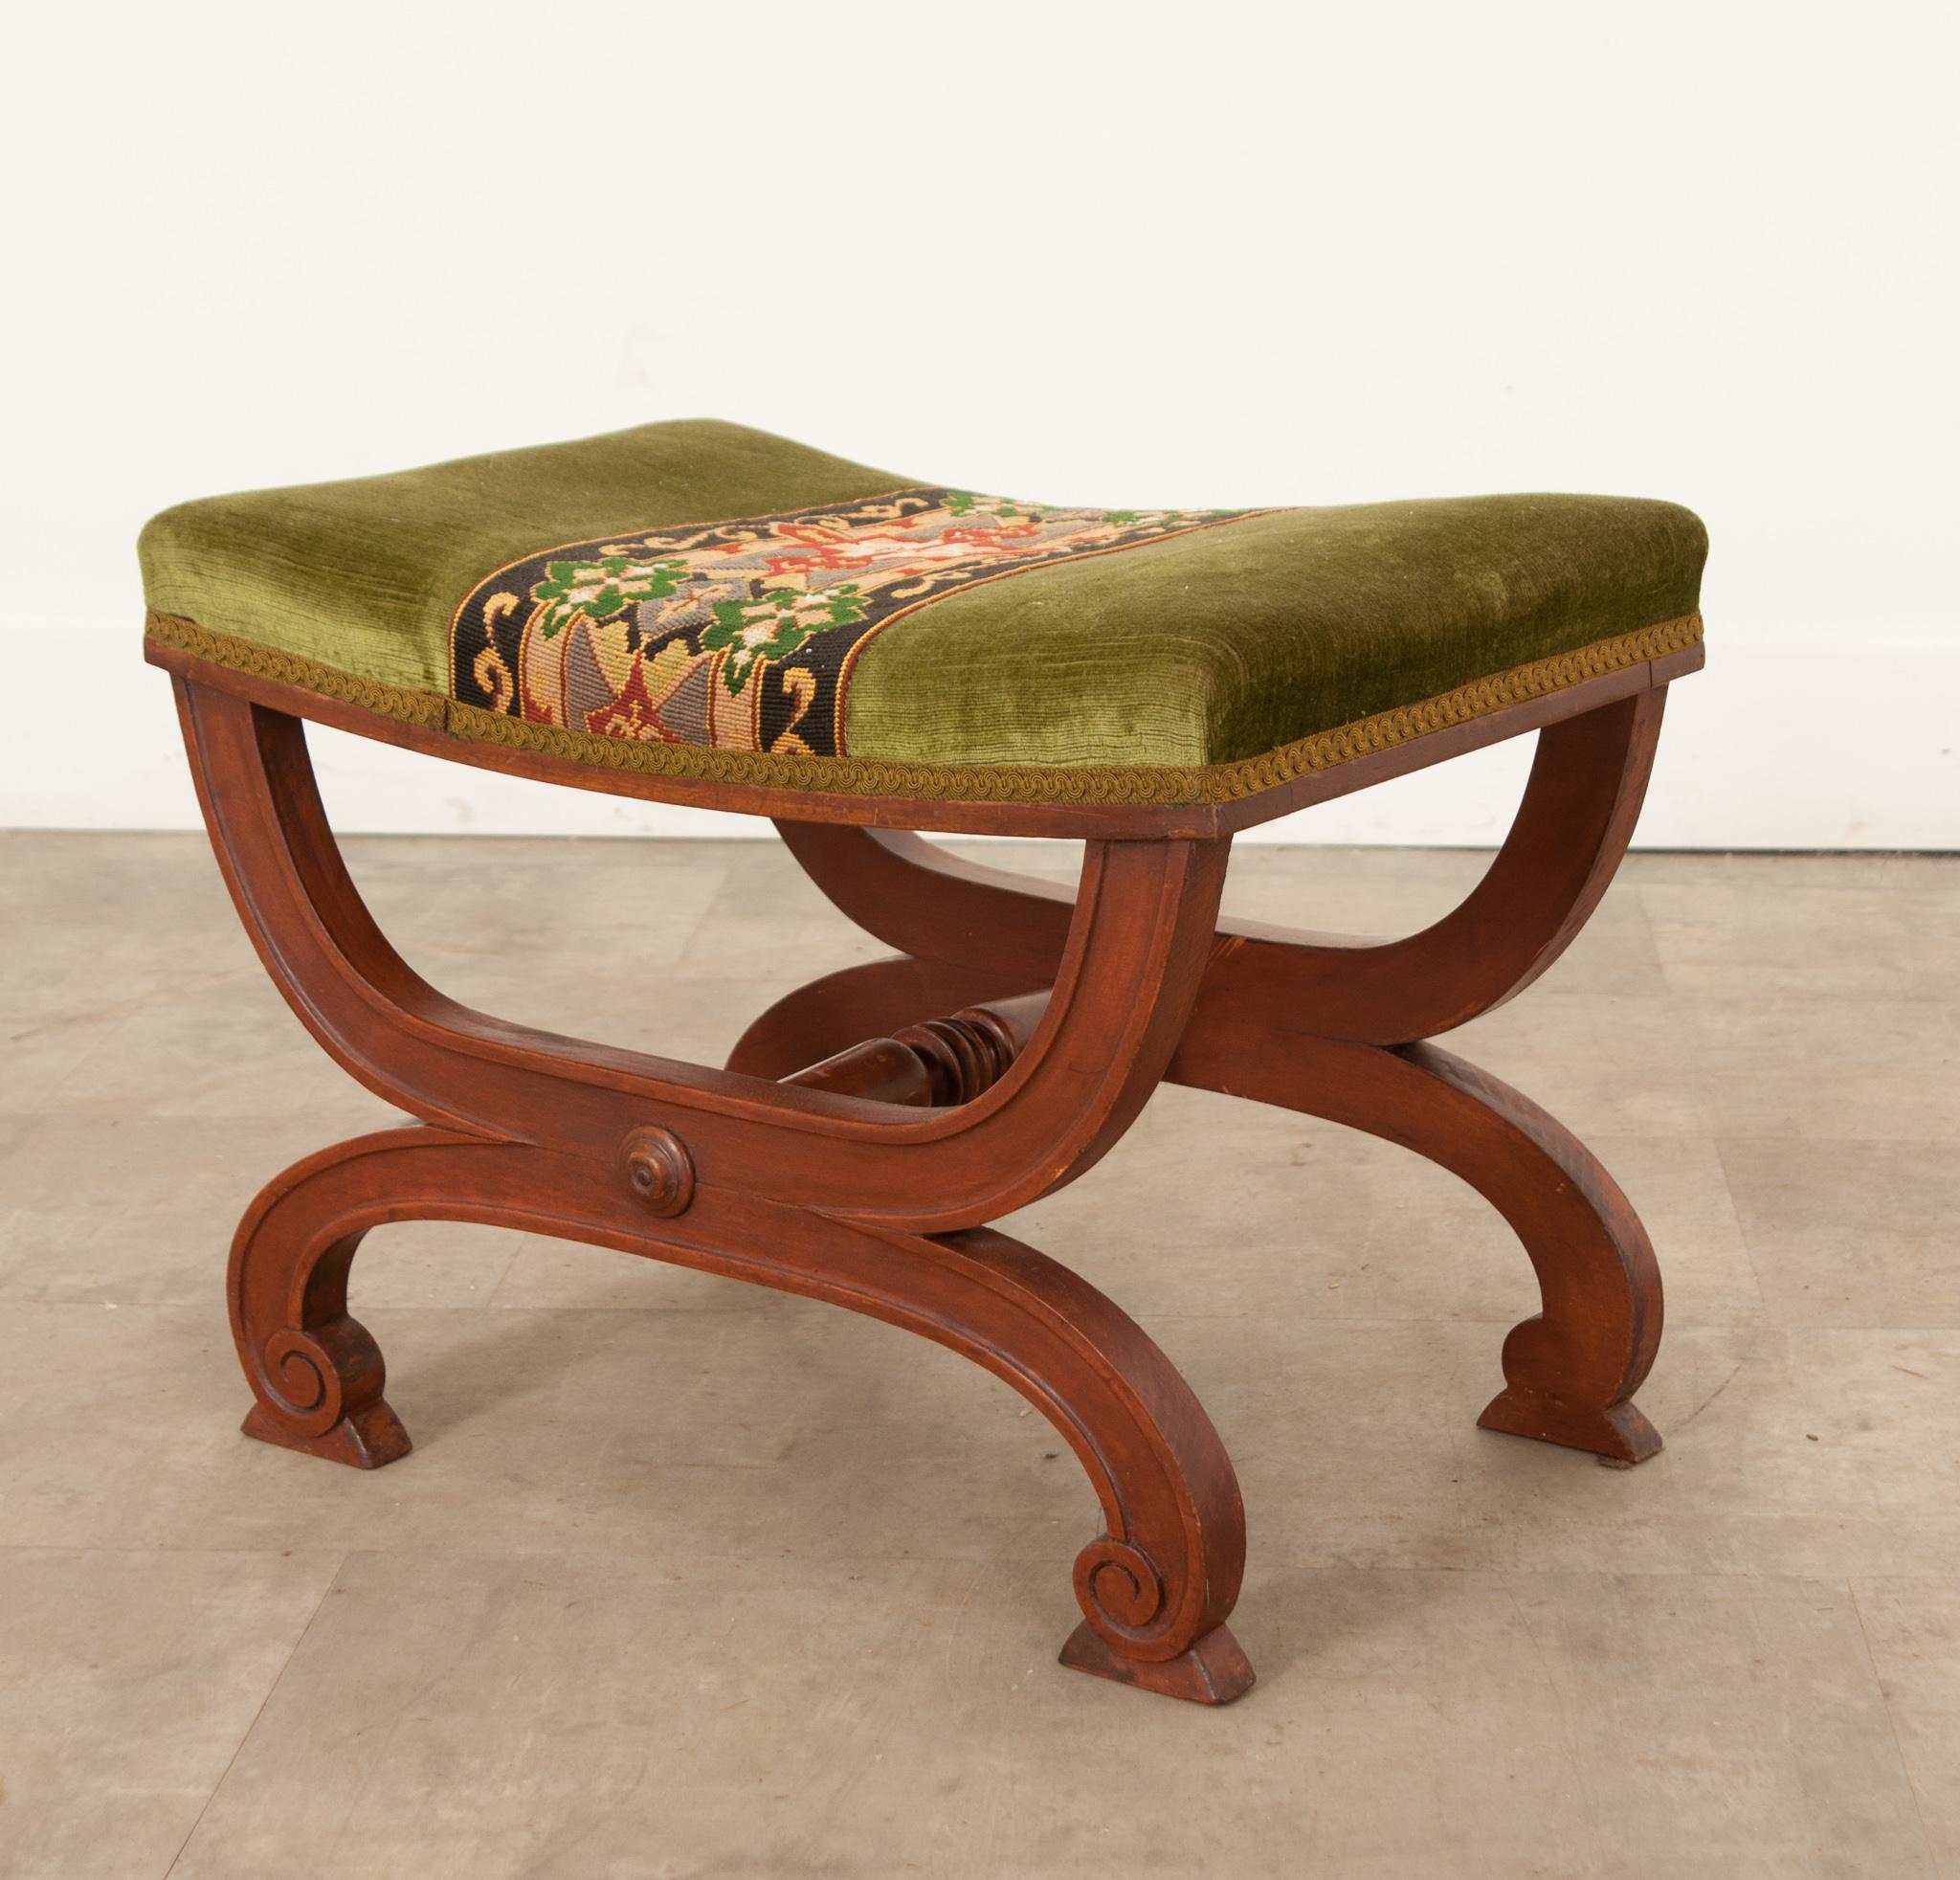 This fantastic petite stool is the perfect antique to dress up any space. Hand-crafted in France circa 1850, this stool is upholstered in green velvet with a beautiful needlepoint runner in the center and surrounded with ribbon trim covering the